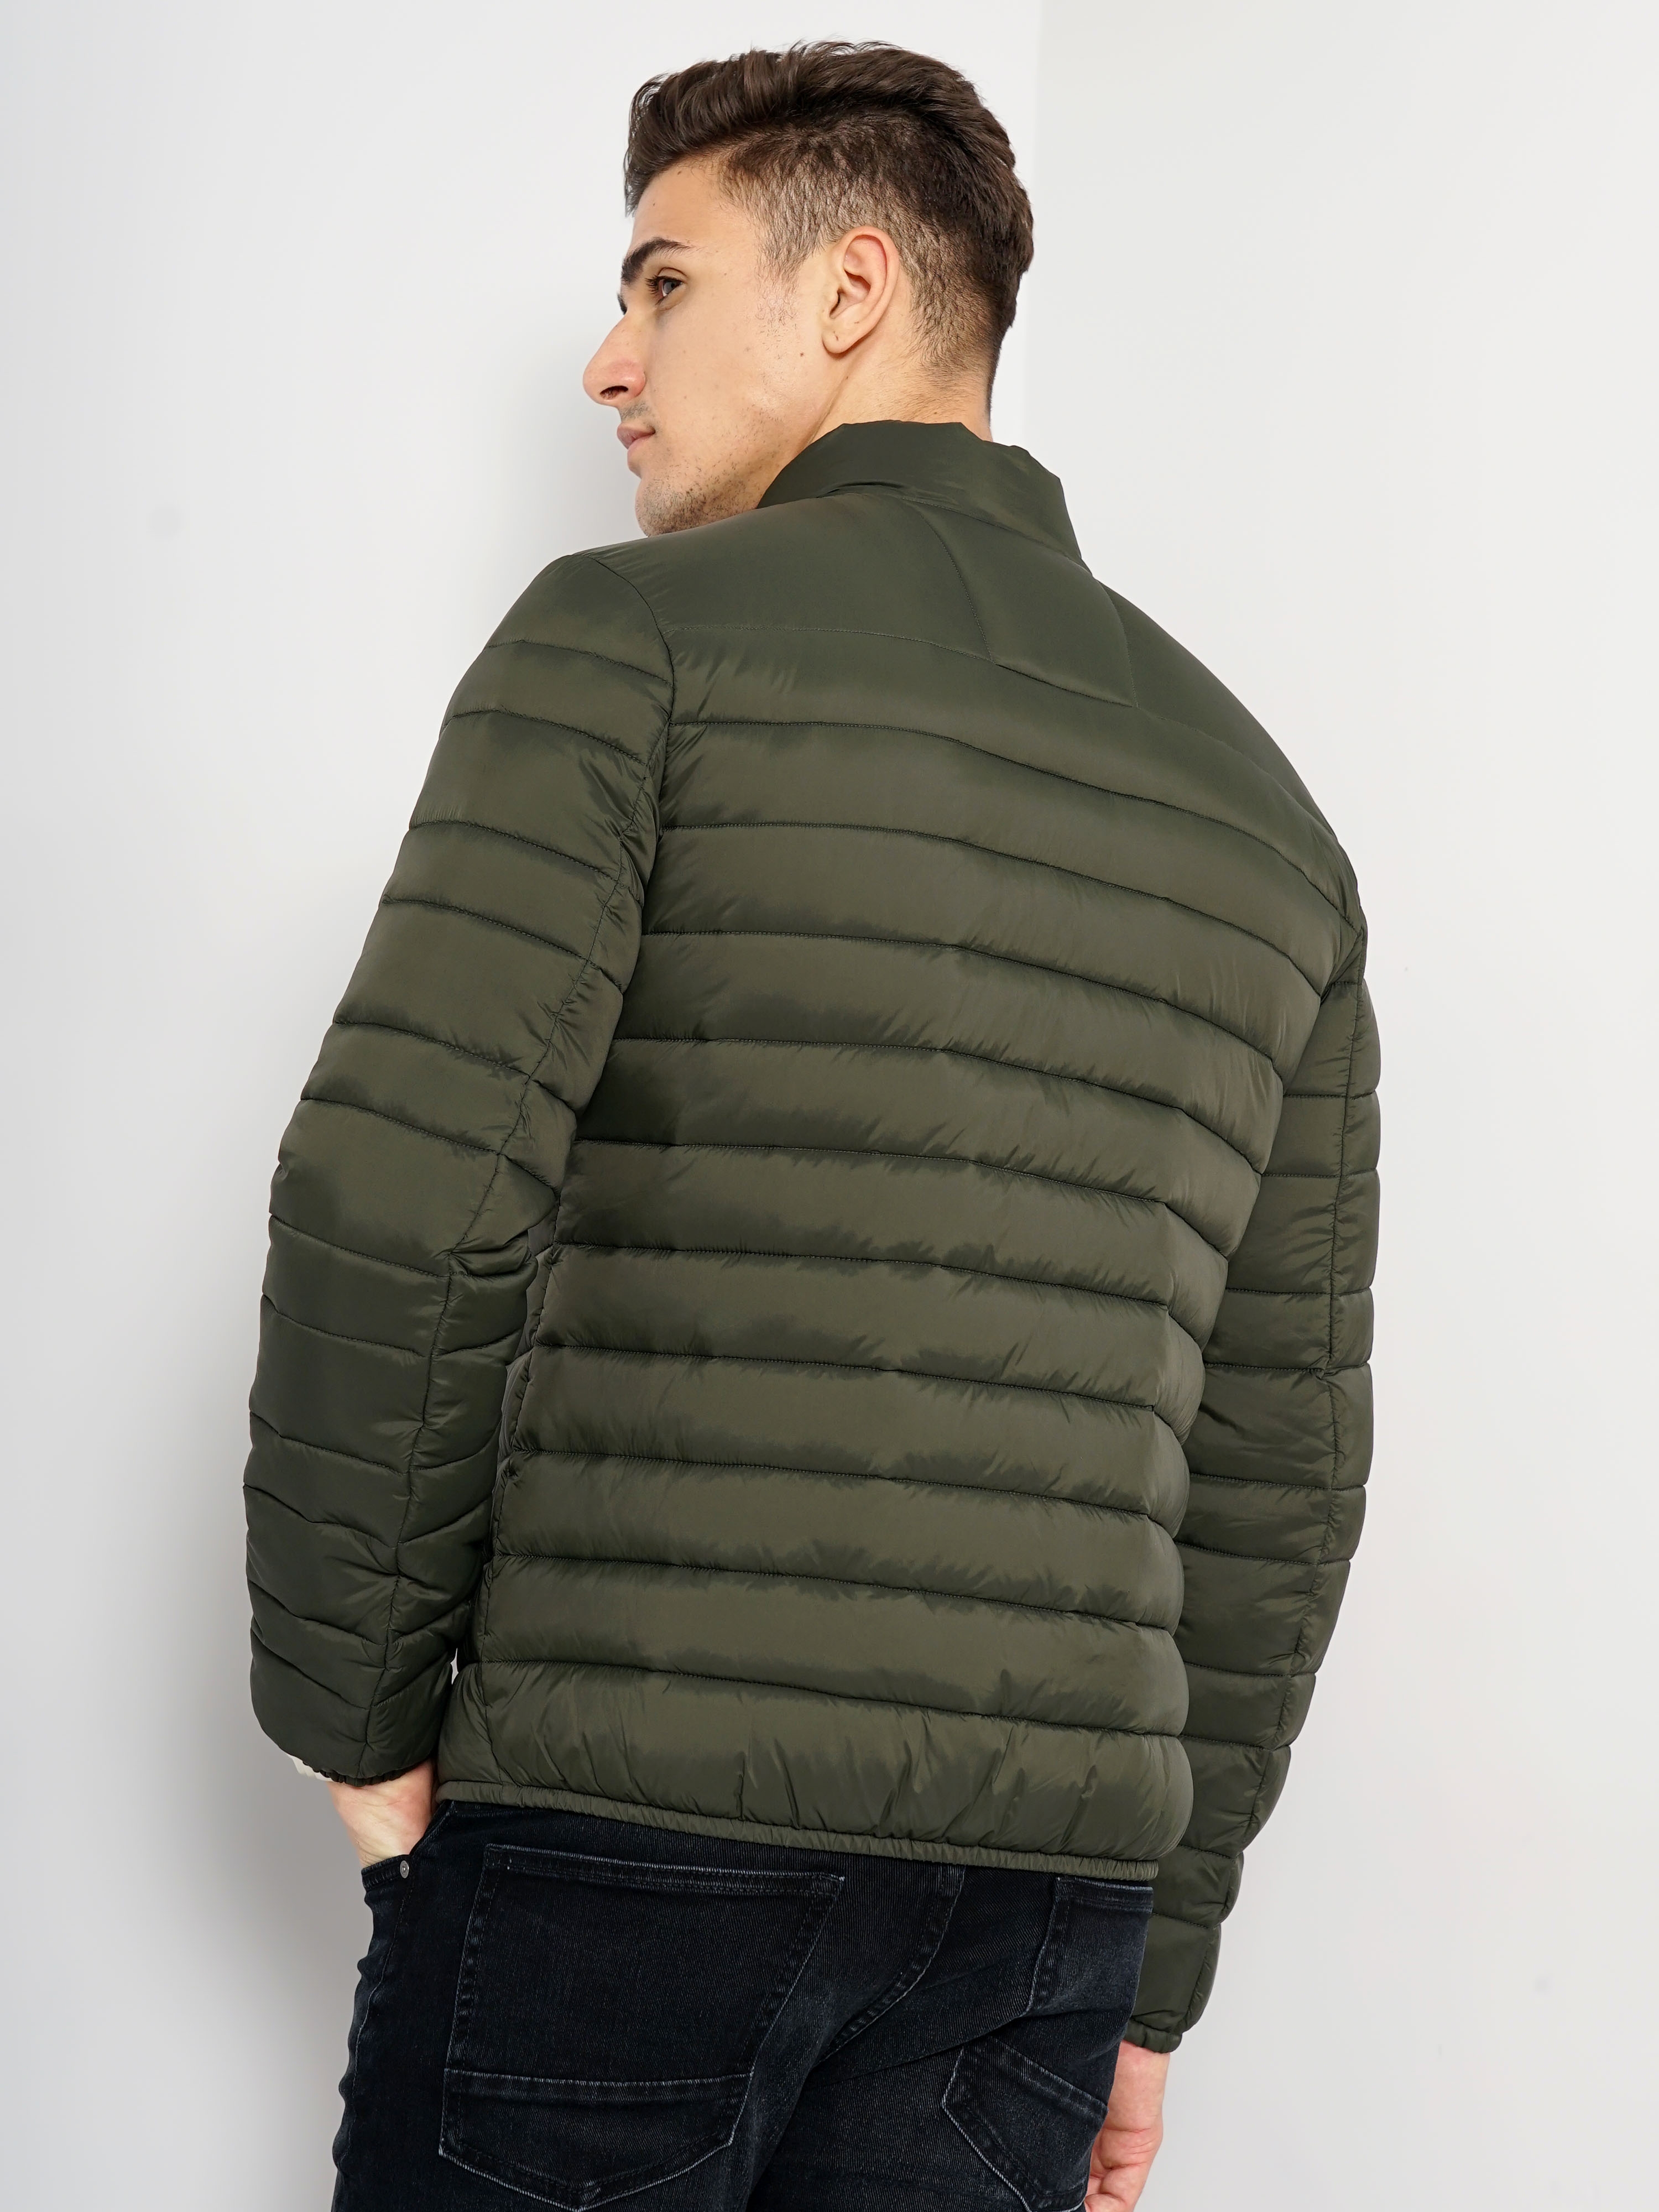 Olive Bomber Jacket - FITTED